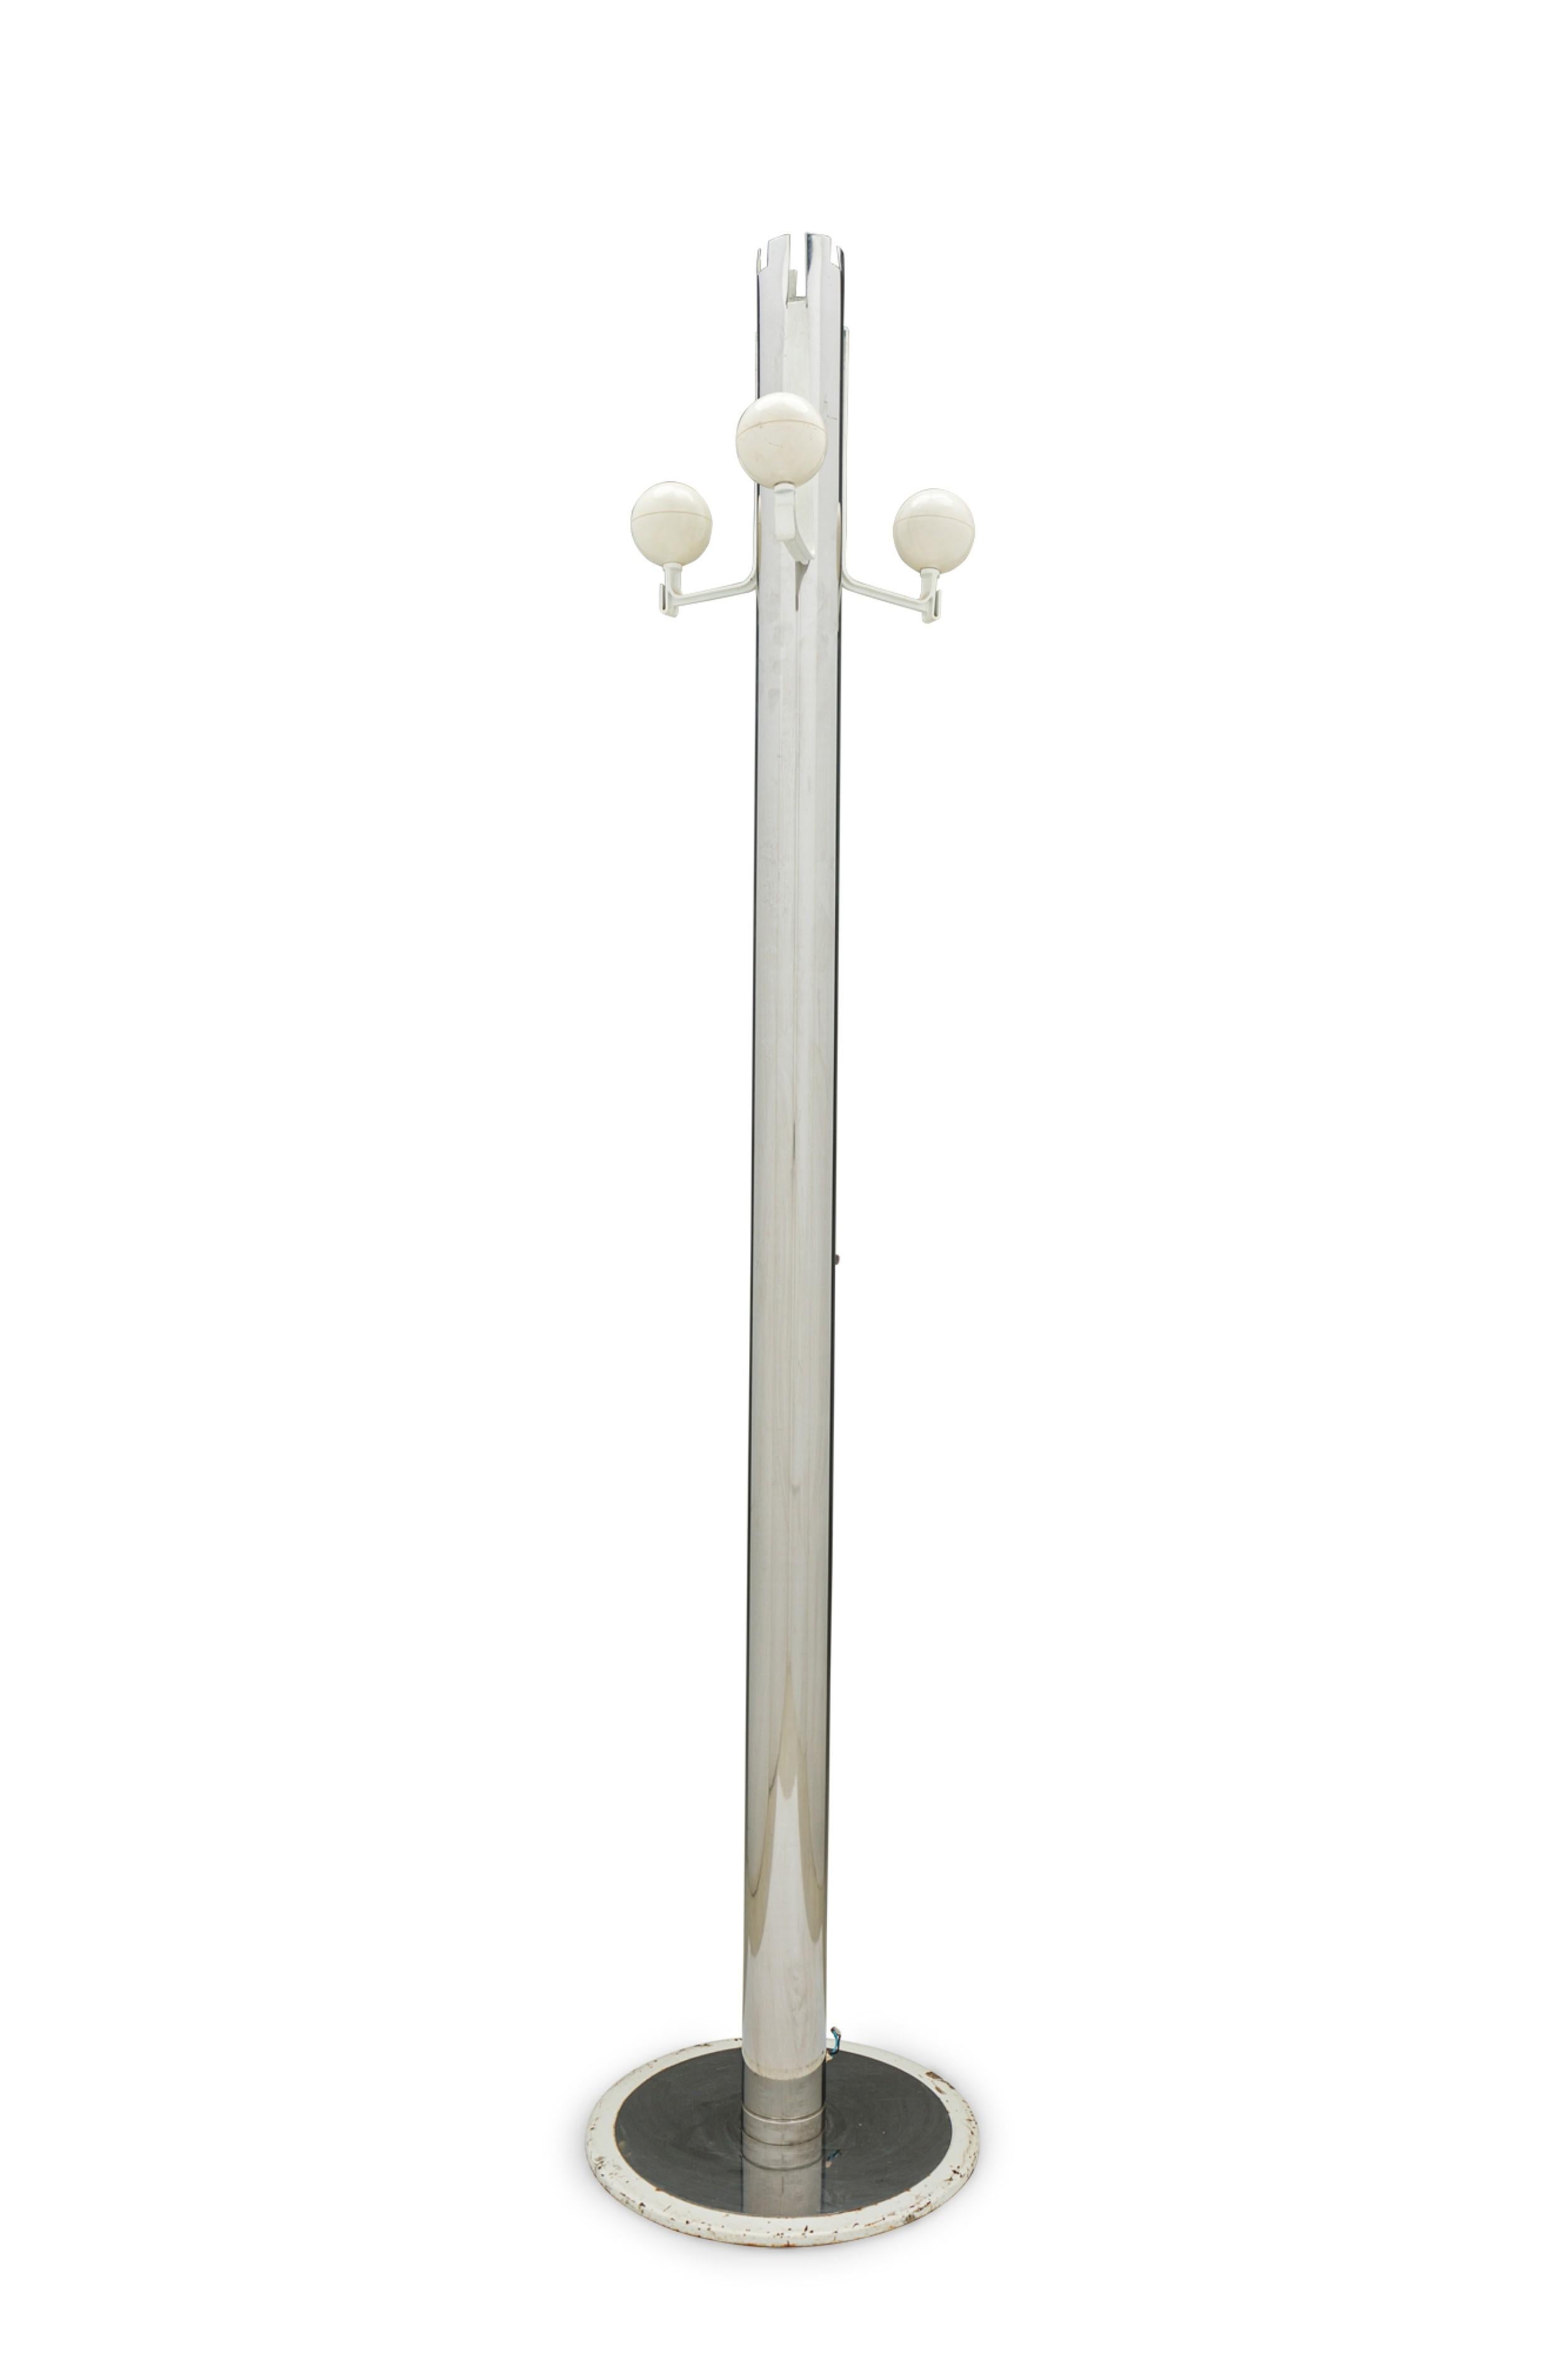 Italian Mid-Century Modern chrome plated coat rack with three bent arms tipped with off-white spheres, resting on a circular metal base. (OSVALDO BORSANI)
 

 Wear to finish
